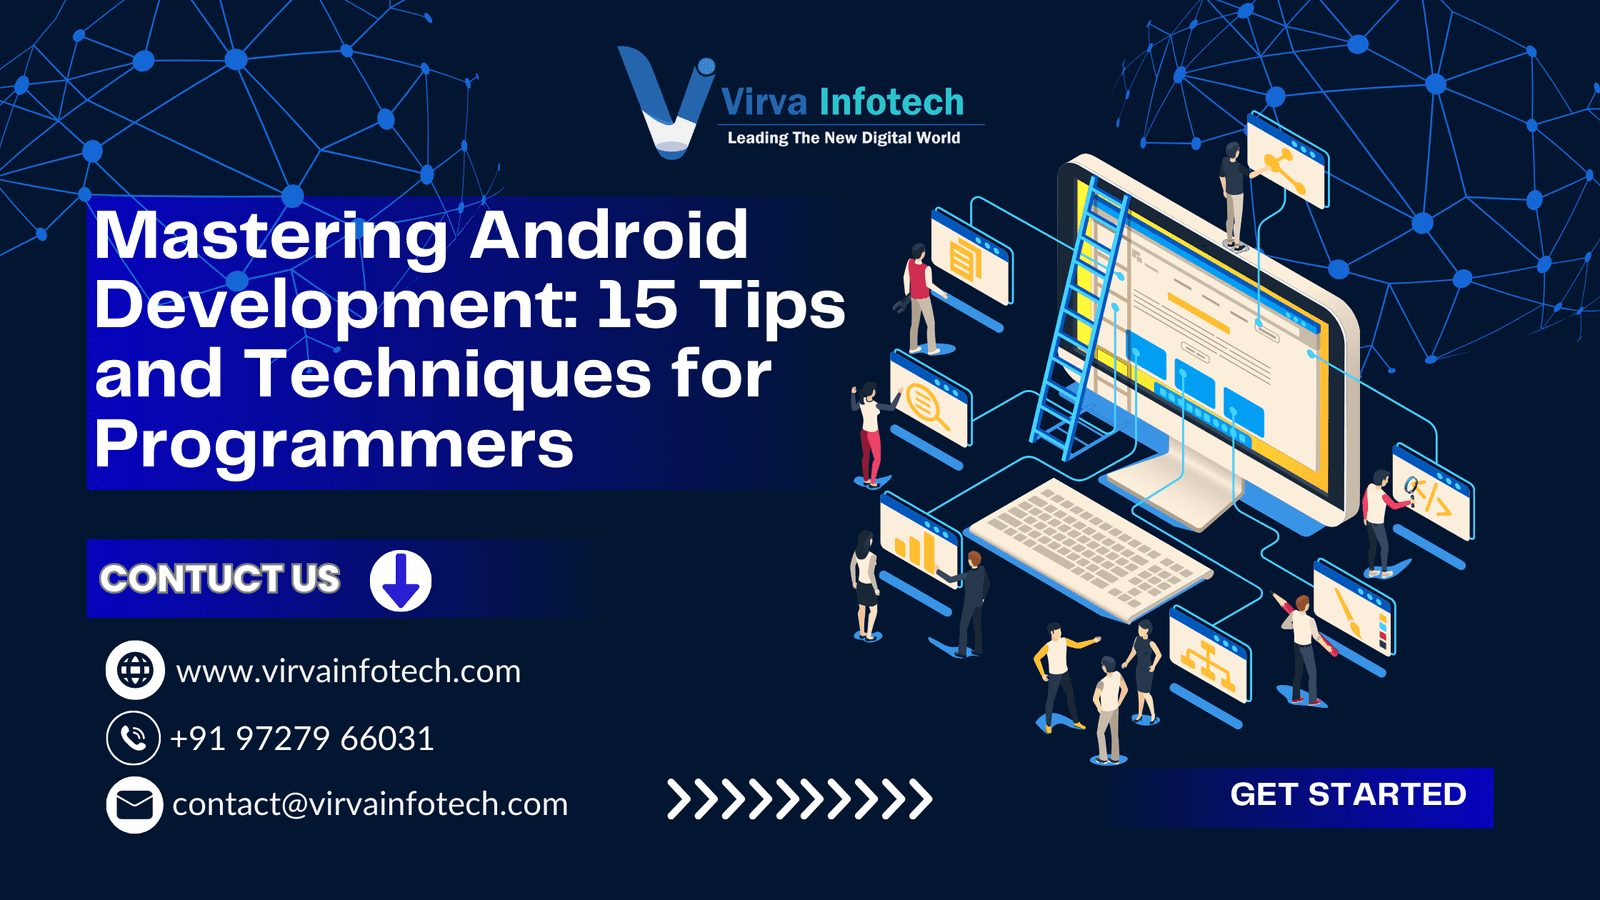 Mastering Android Development: 15 Tips and Techniques for Programmers